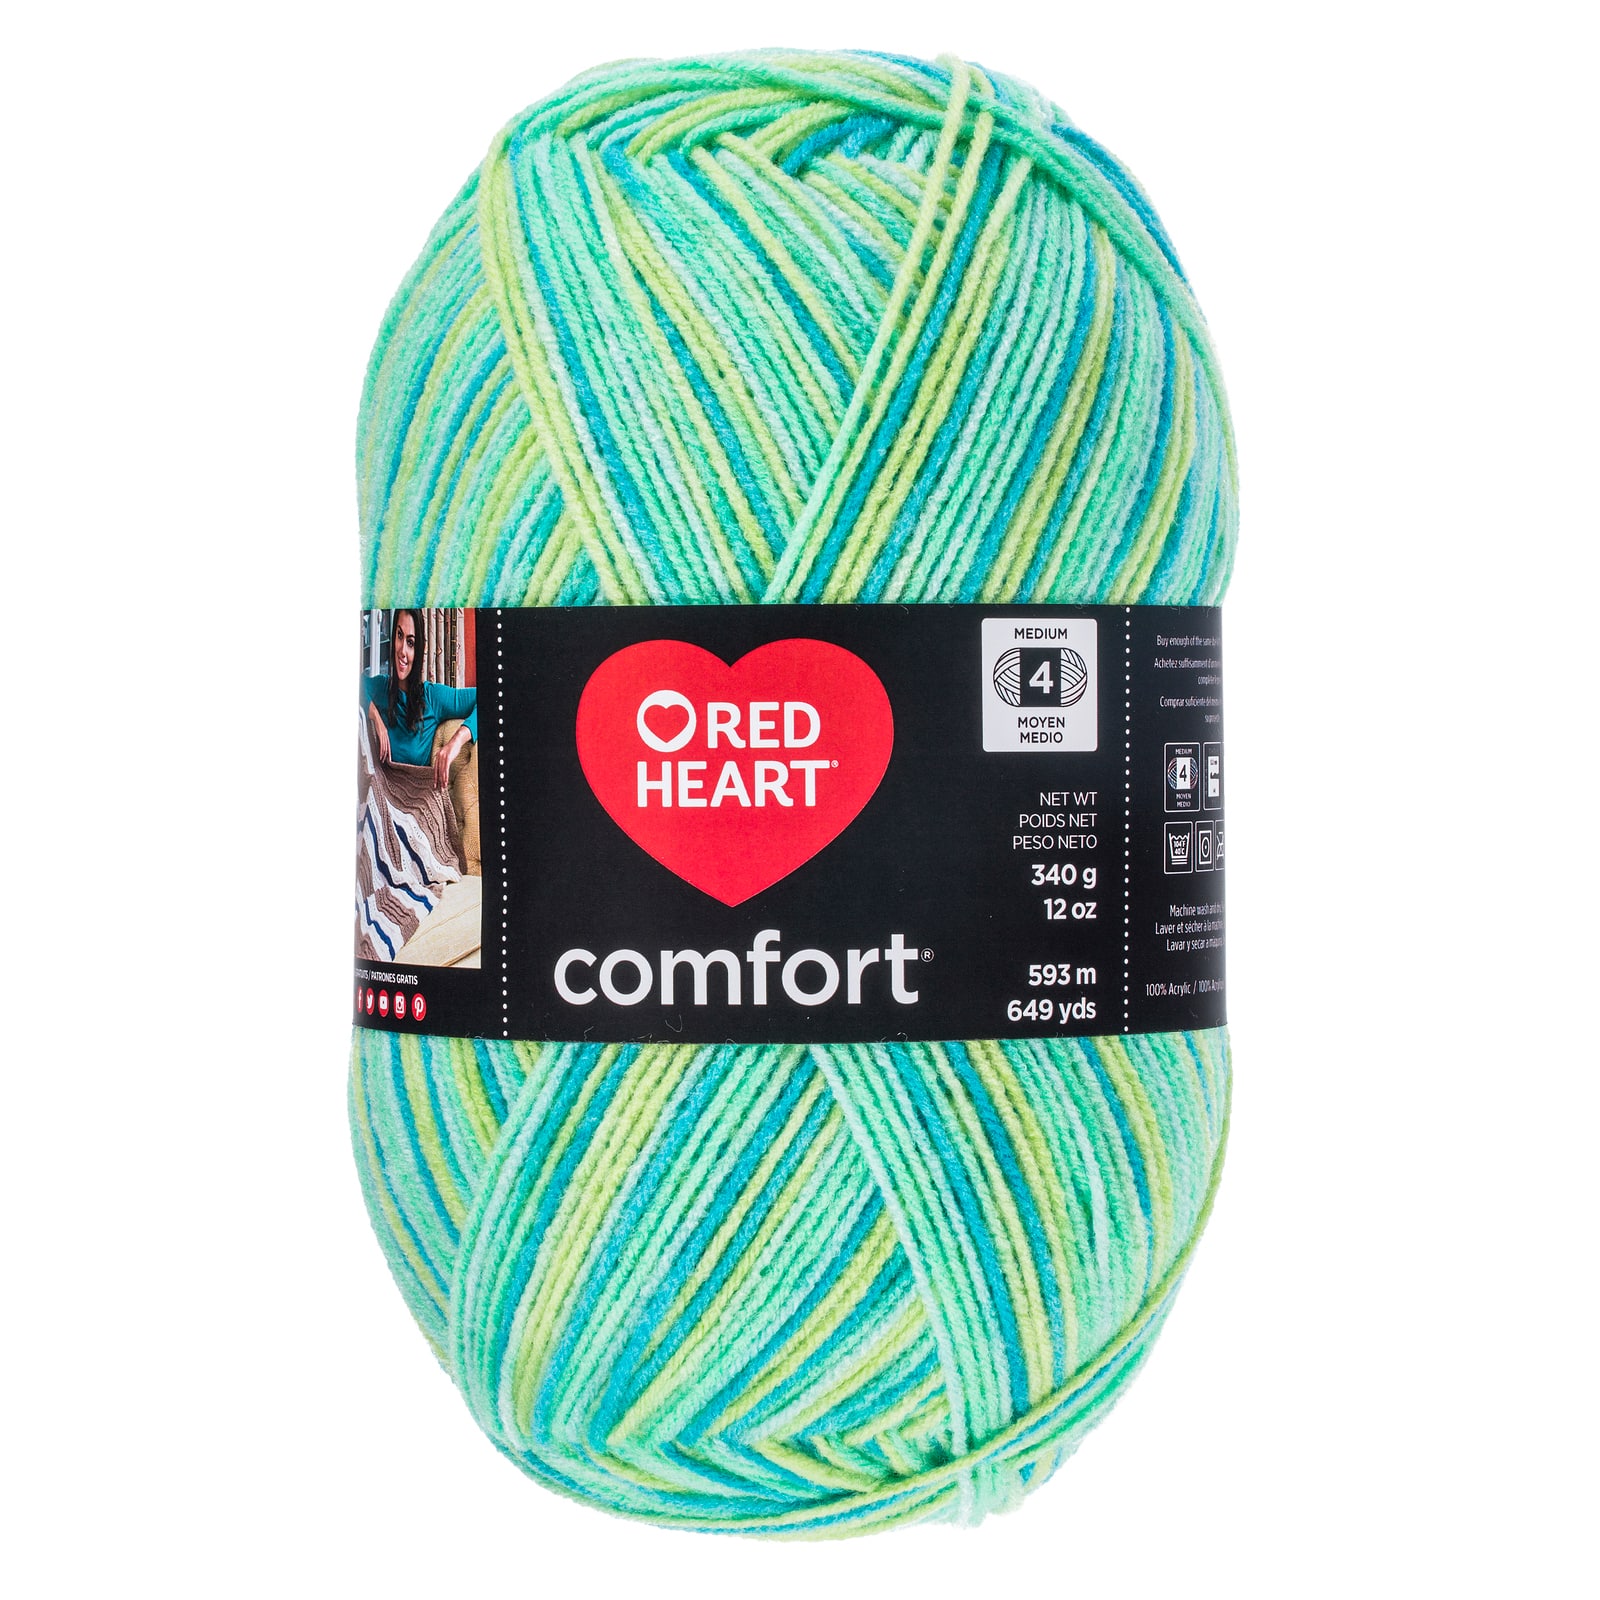 Buy the Red Heart® Comfort Yarn, Multicolor at Michaels